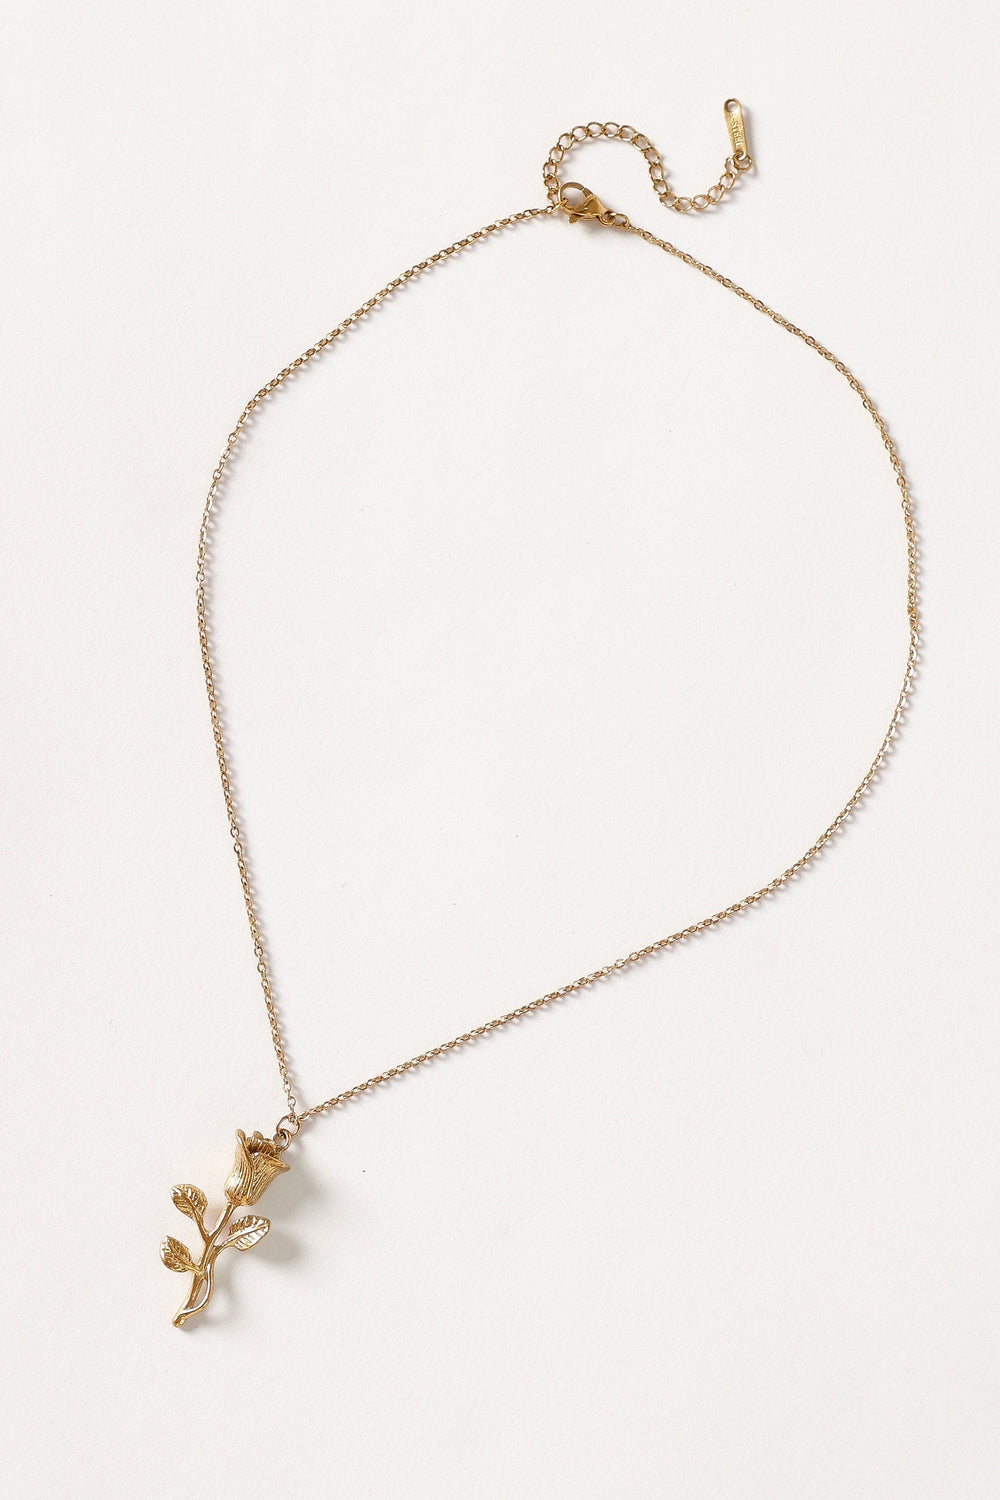 Petal and Pup USA ACCESSORIES Damira Flower Necklace - Gold One Size